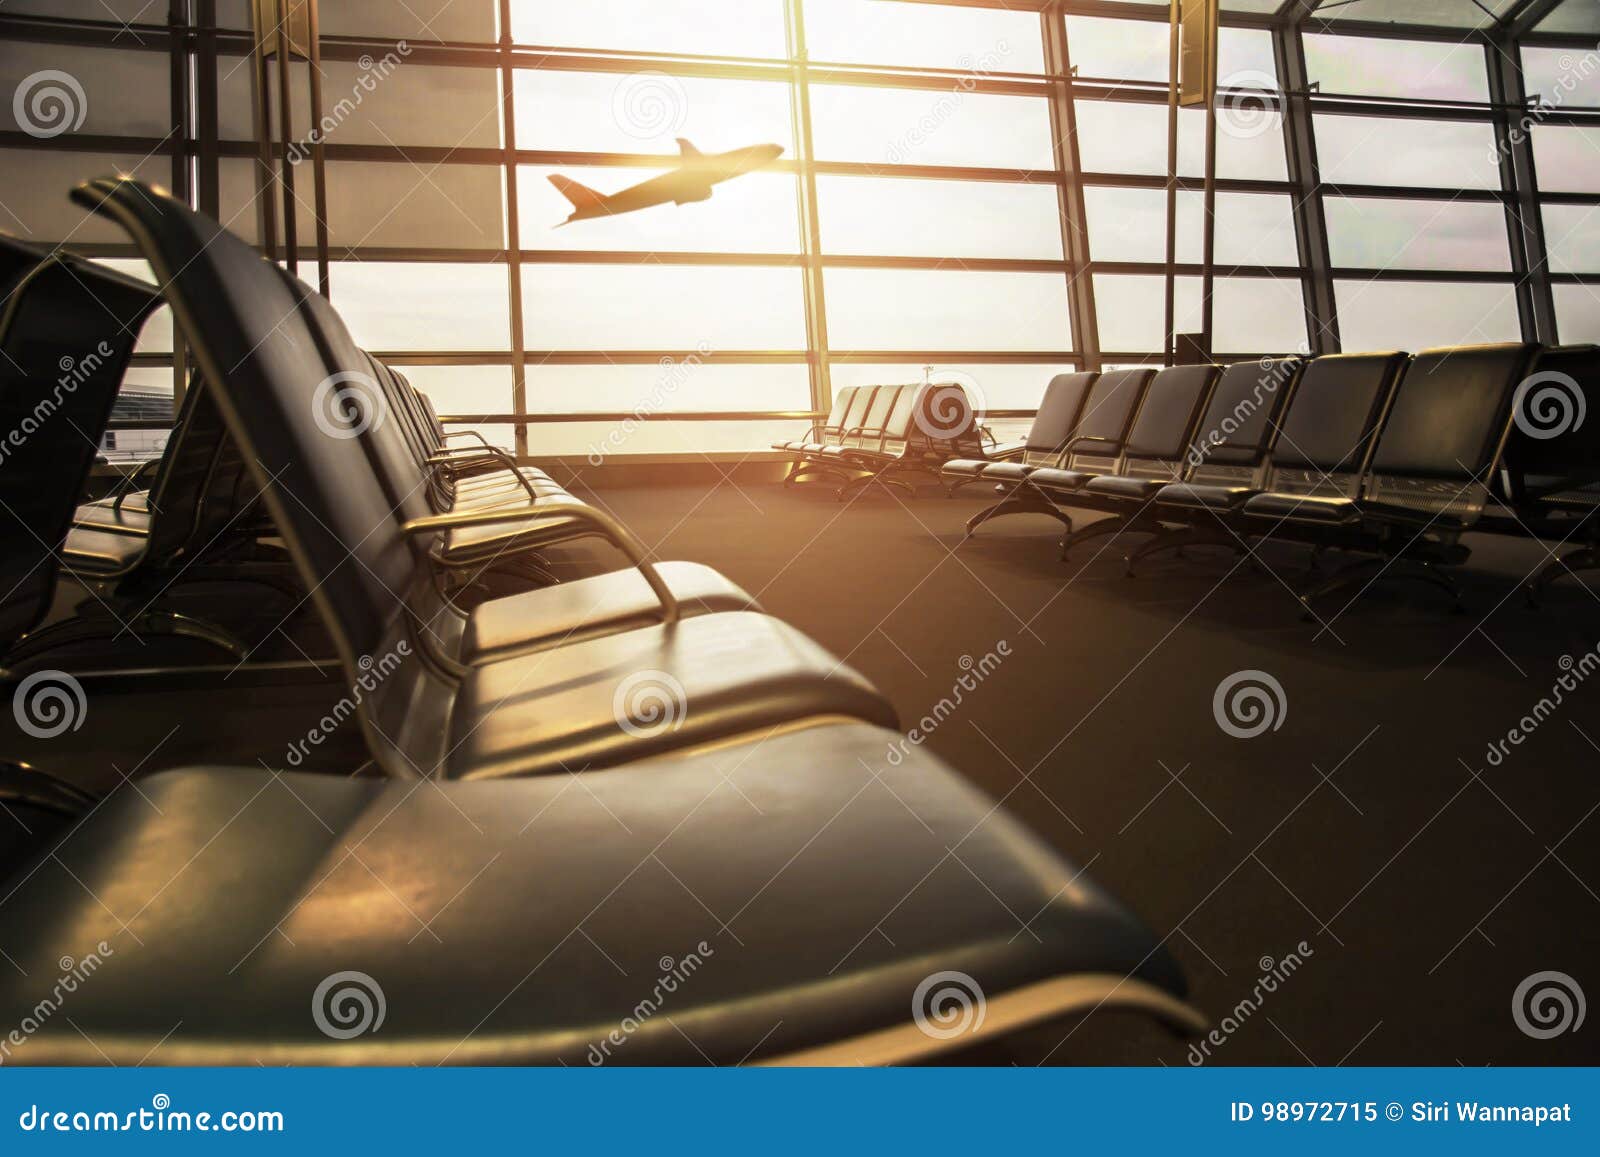 airport terminal with empty chair and bursting light, airplane b